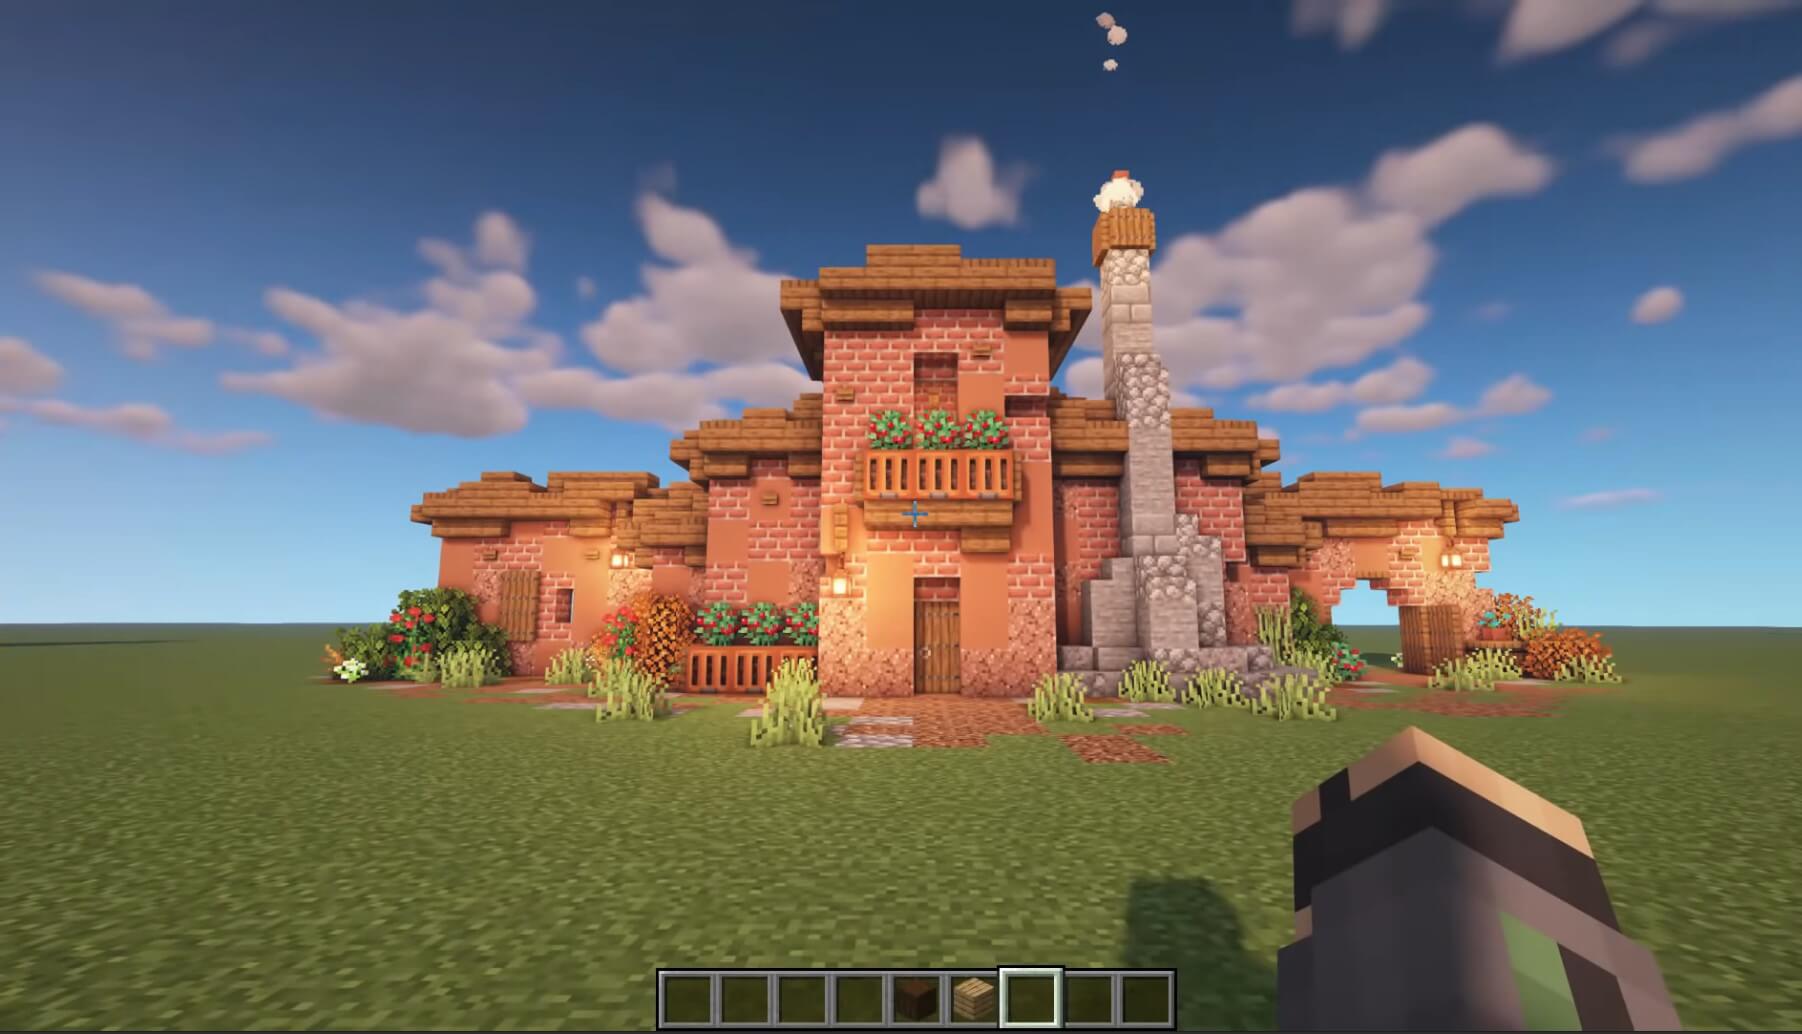 18 Awesome Minecraft Builds To Get Yourself Inspired   Minecraft ...